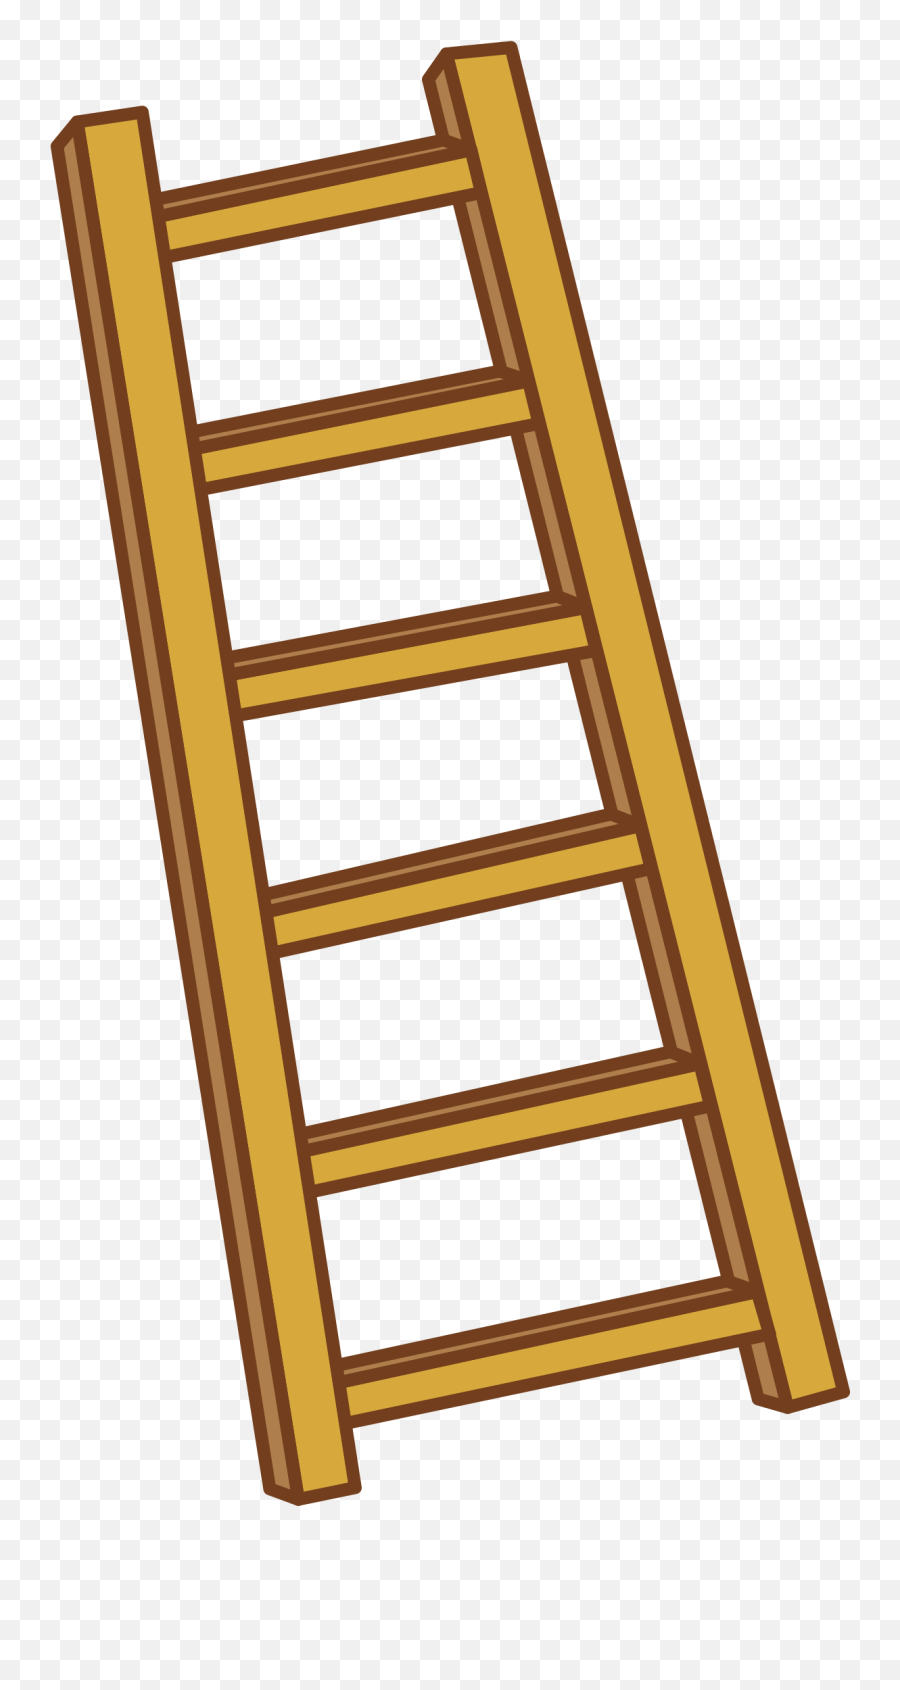 Library Of Ladder Clip Art Black And - Clipart Images Of Ladder Emoji,Ladder Clipart